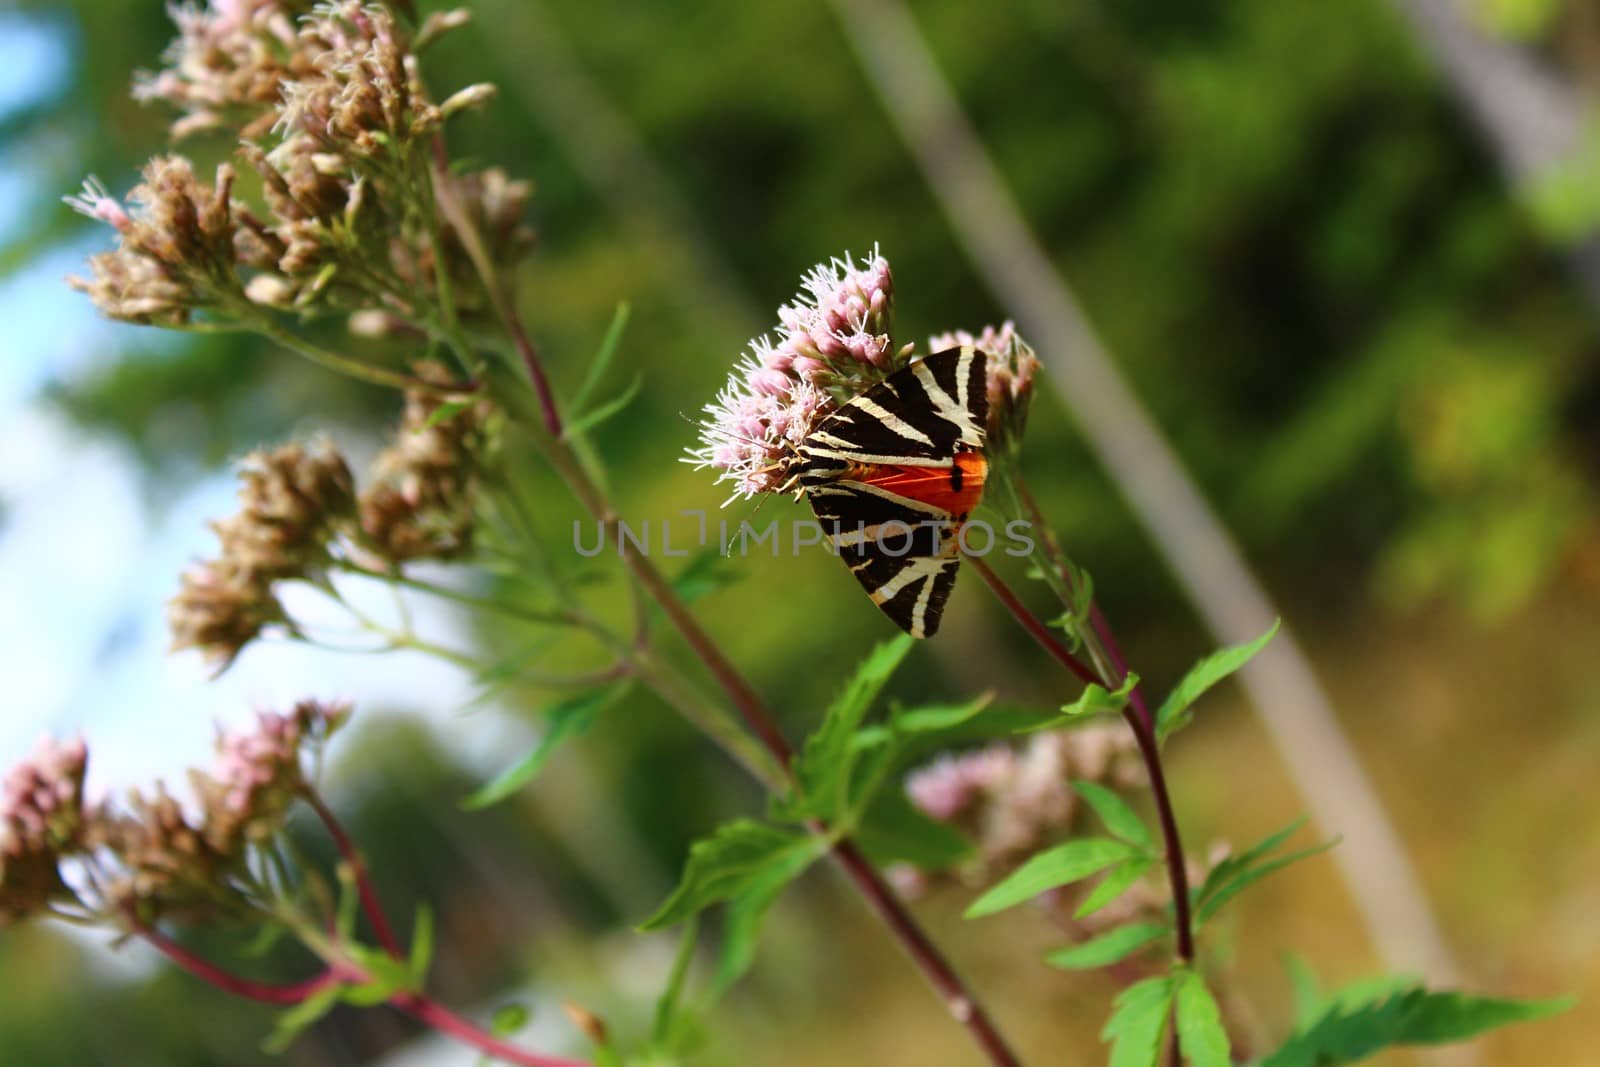 The picture shows a jersey tiger on a flower.